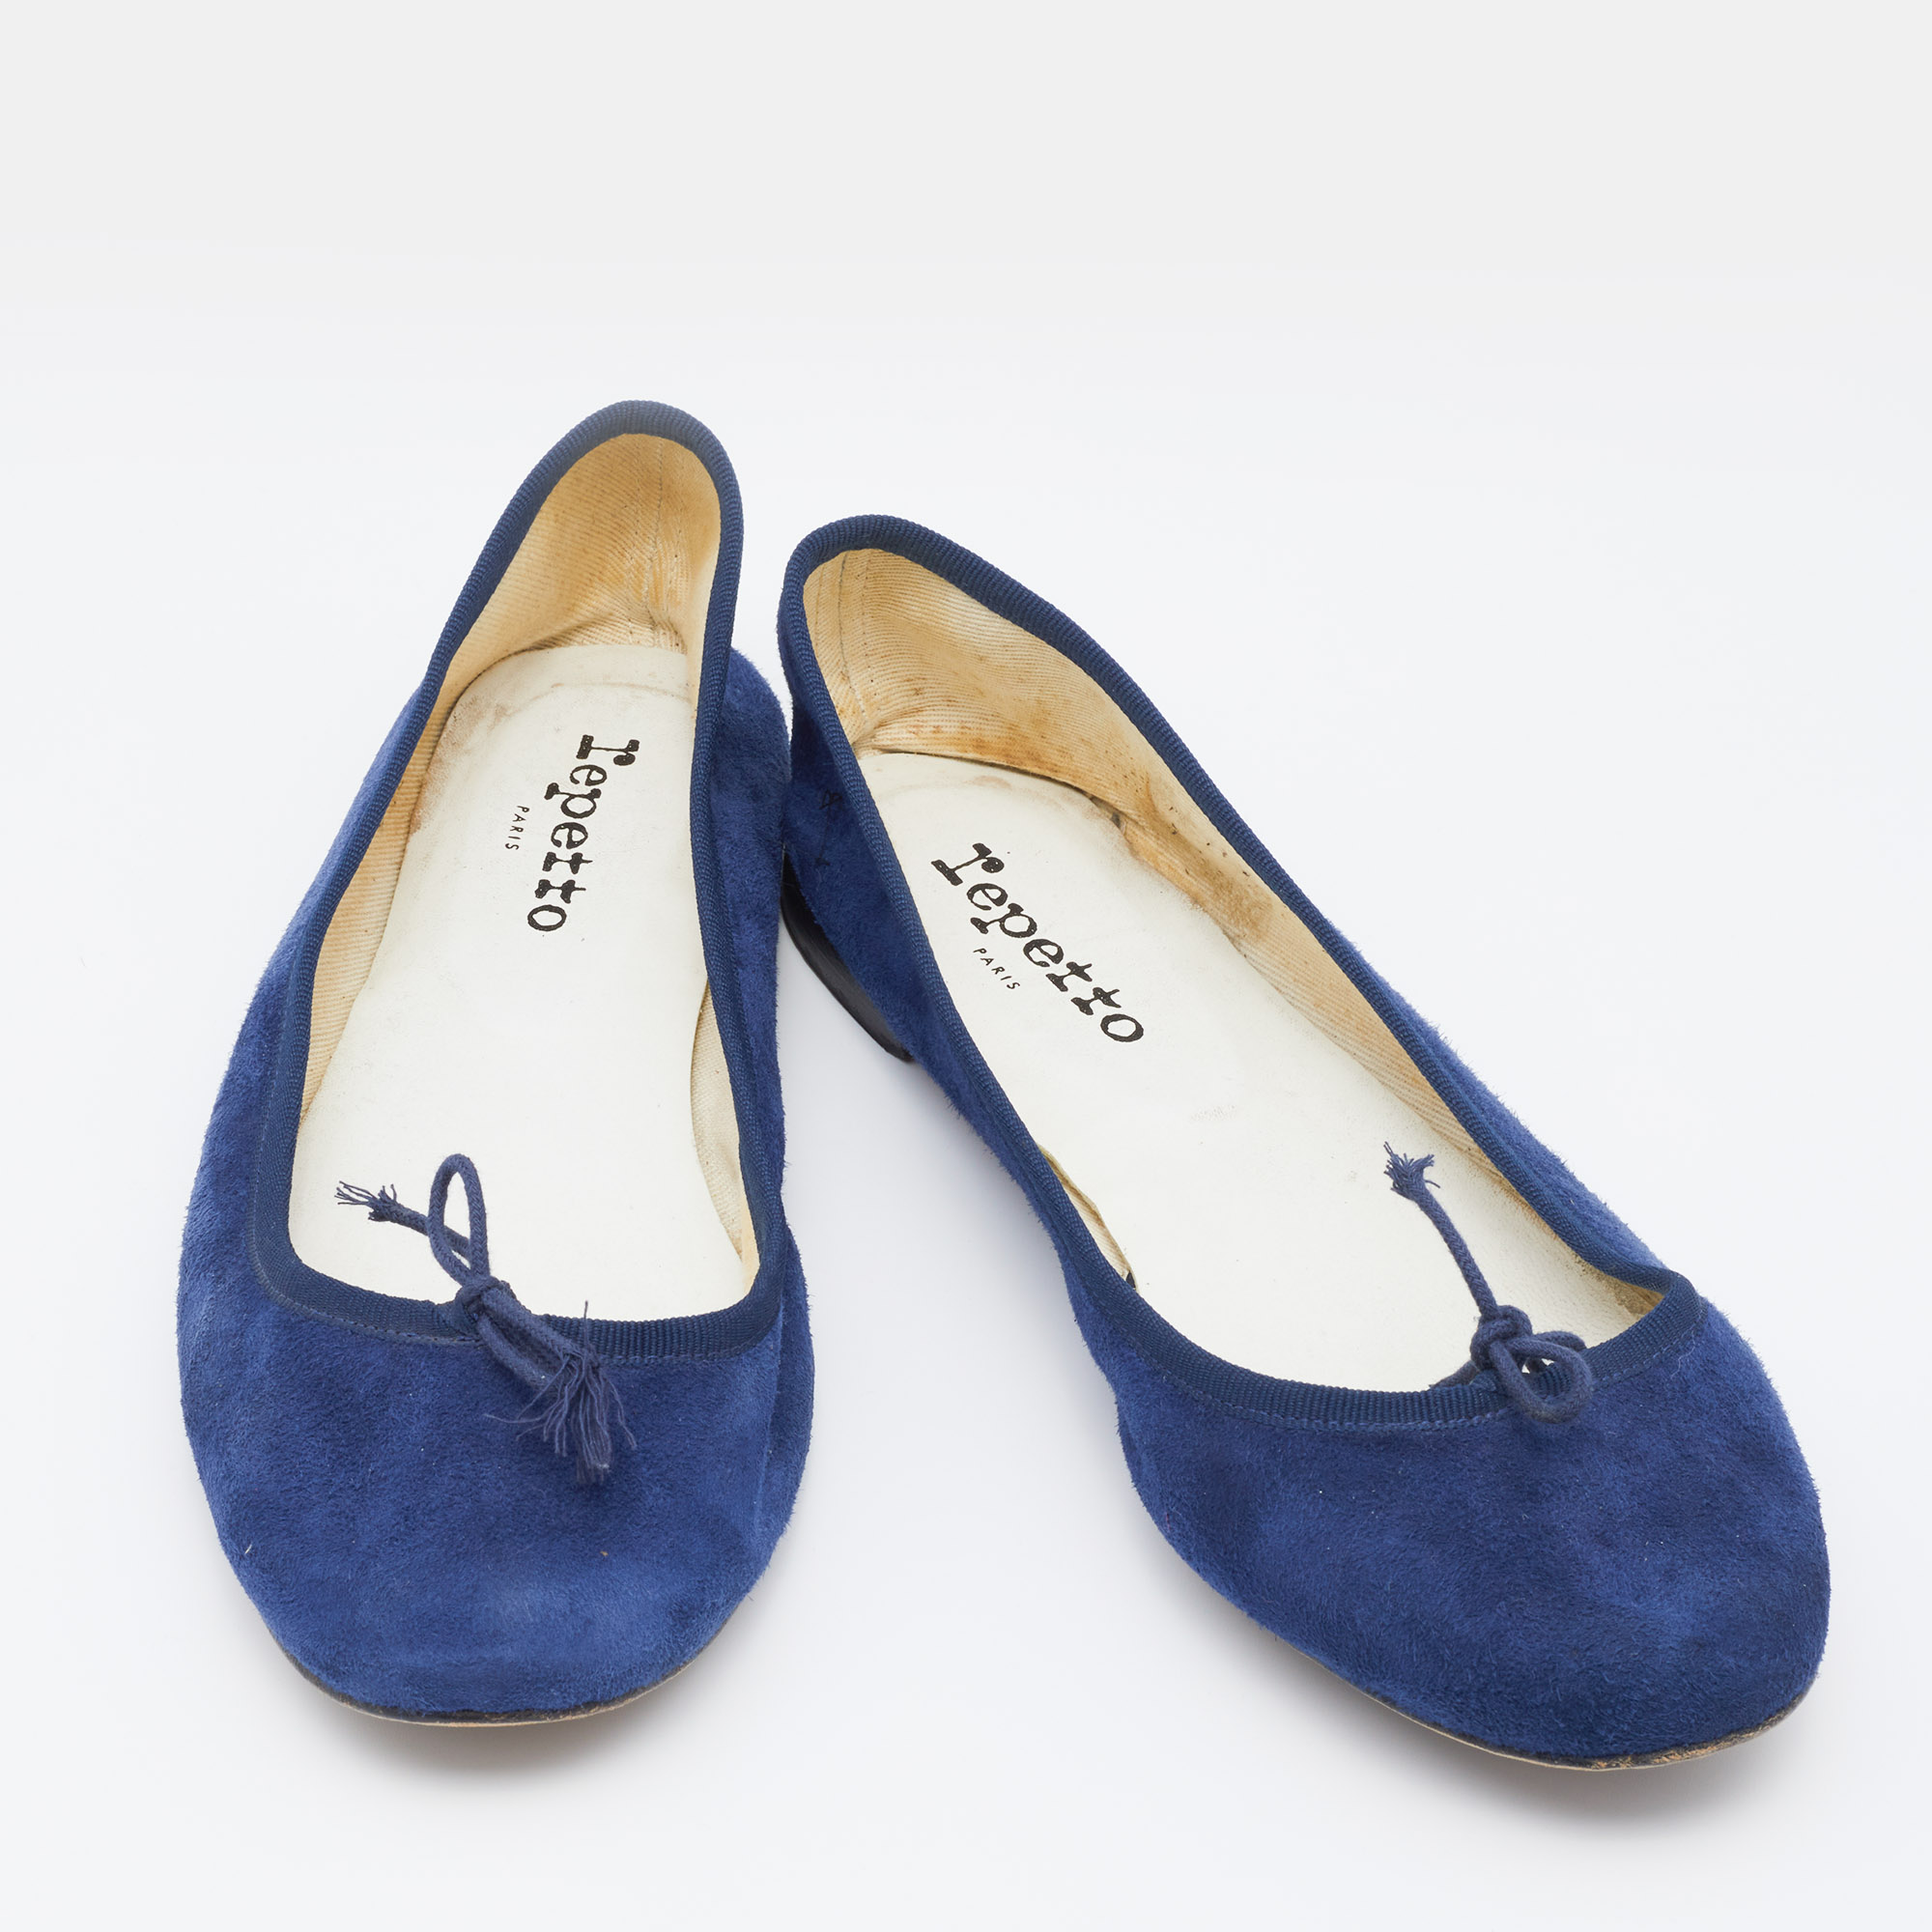 Repetto Navy Blue Suede Bow Ballet Flats Size 41